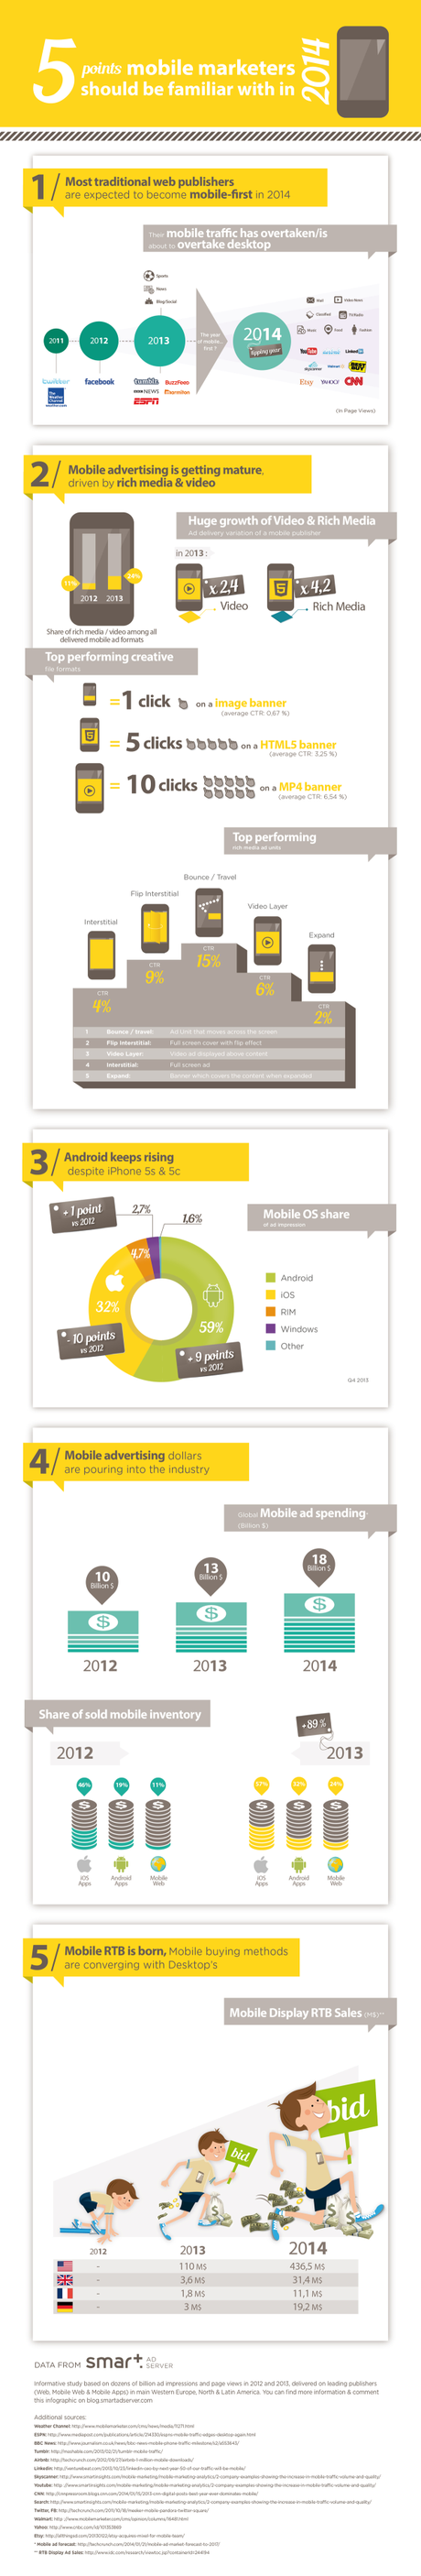 Infographic_5_points_mobile_marketers_should_know